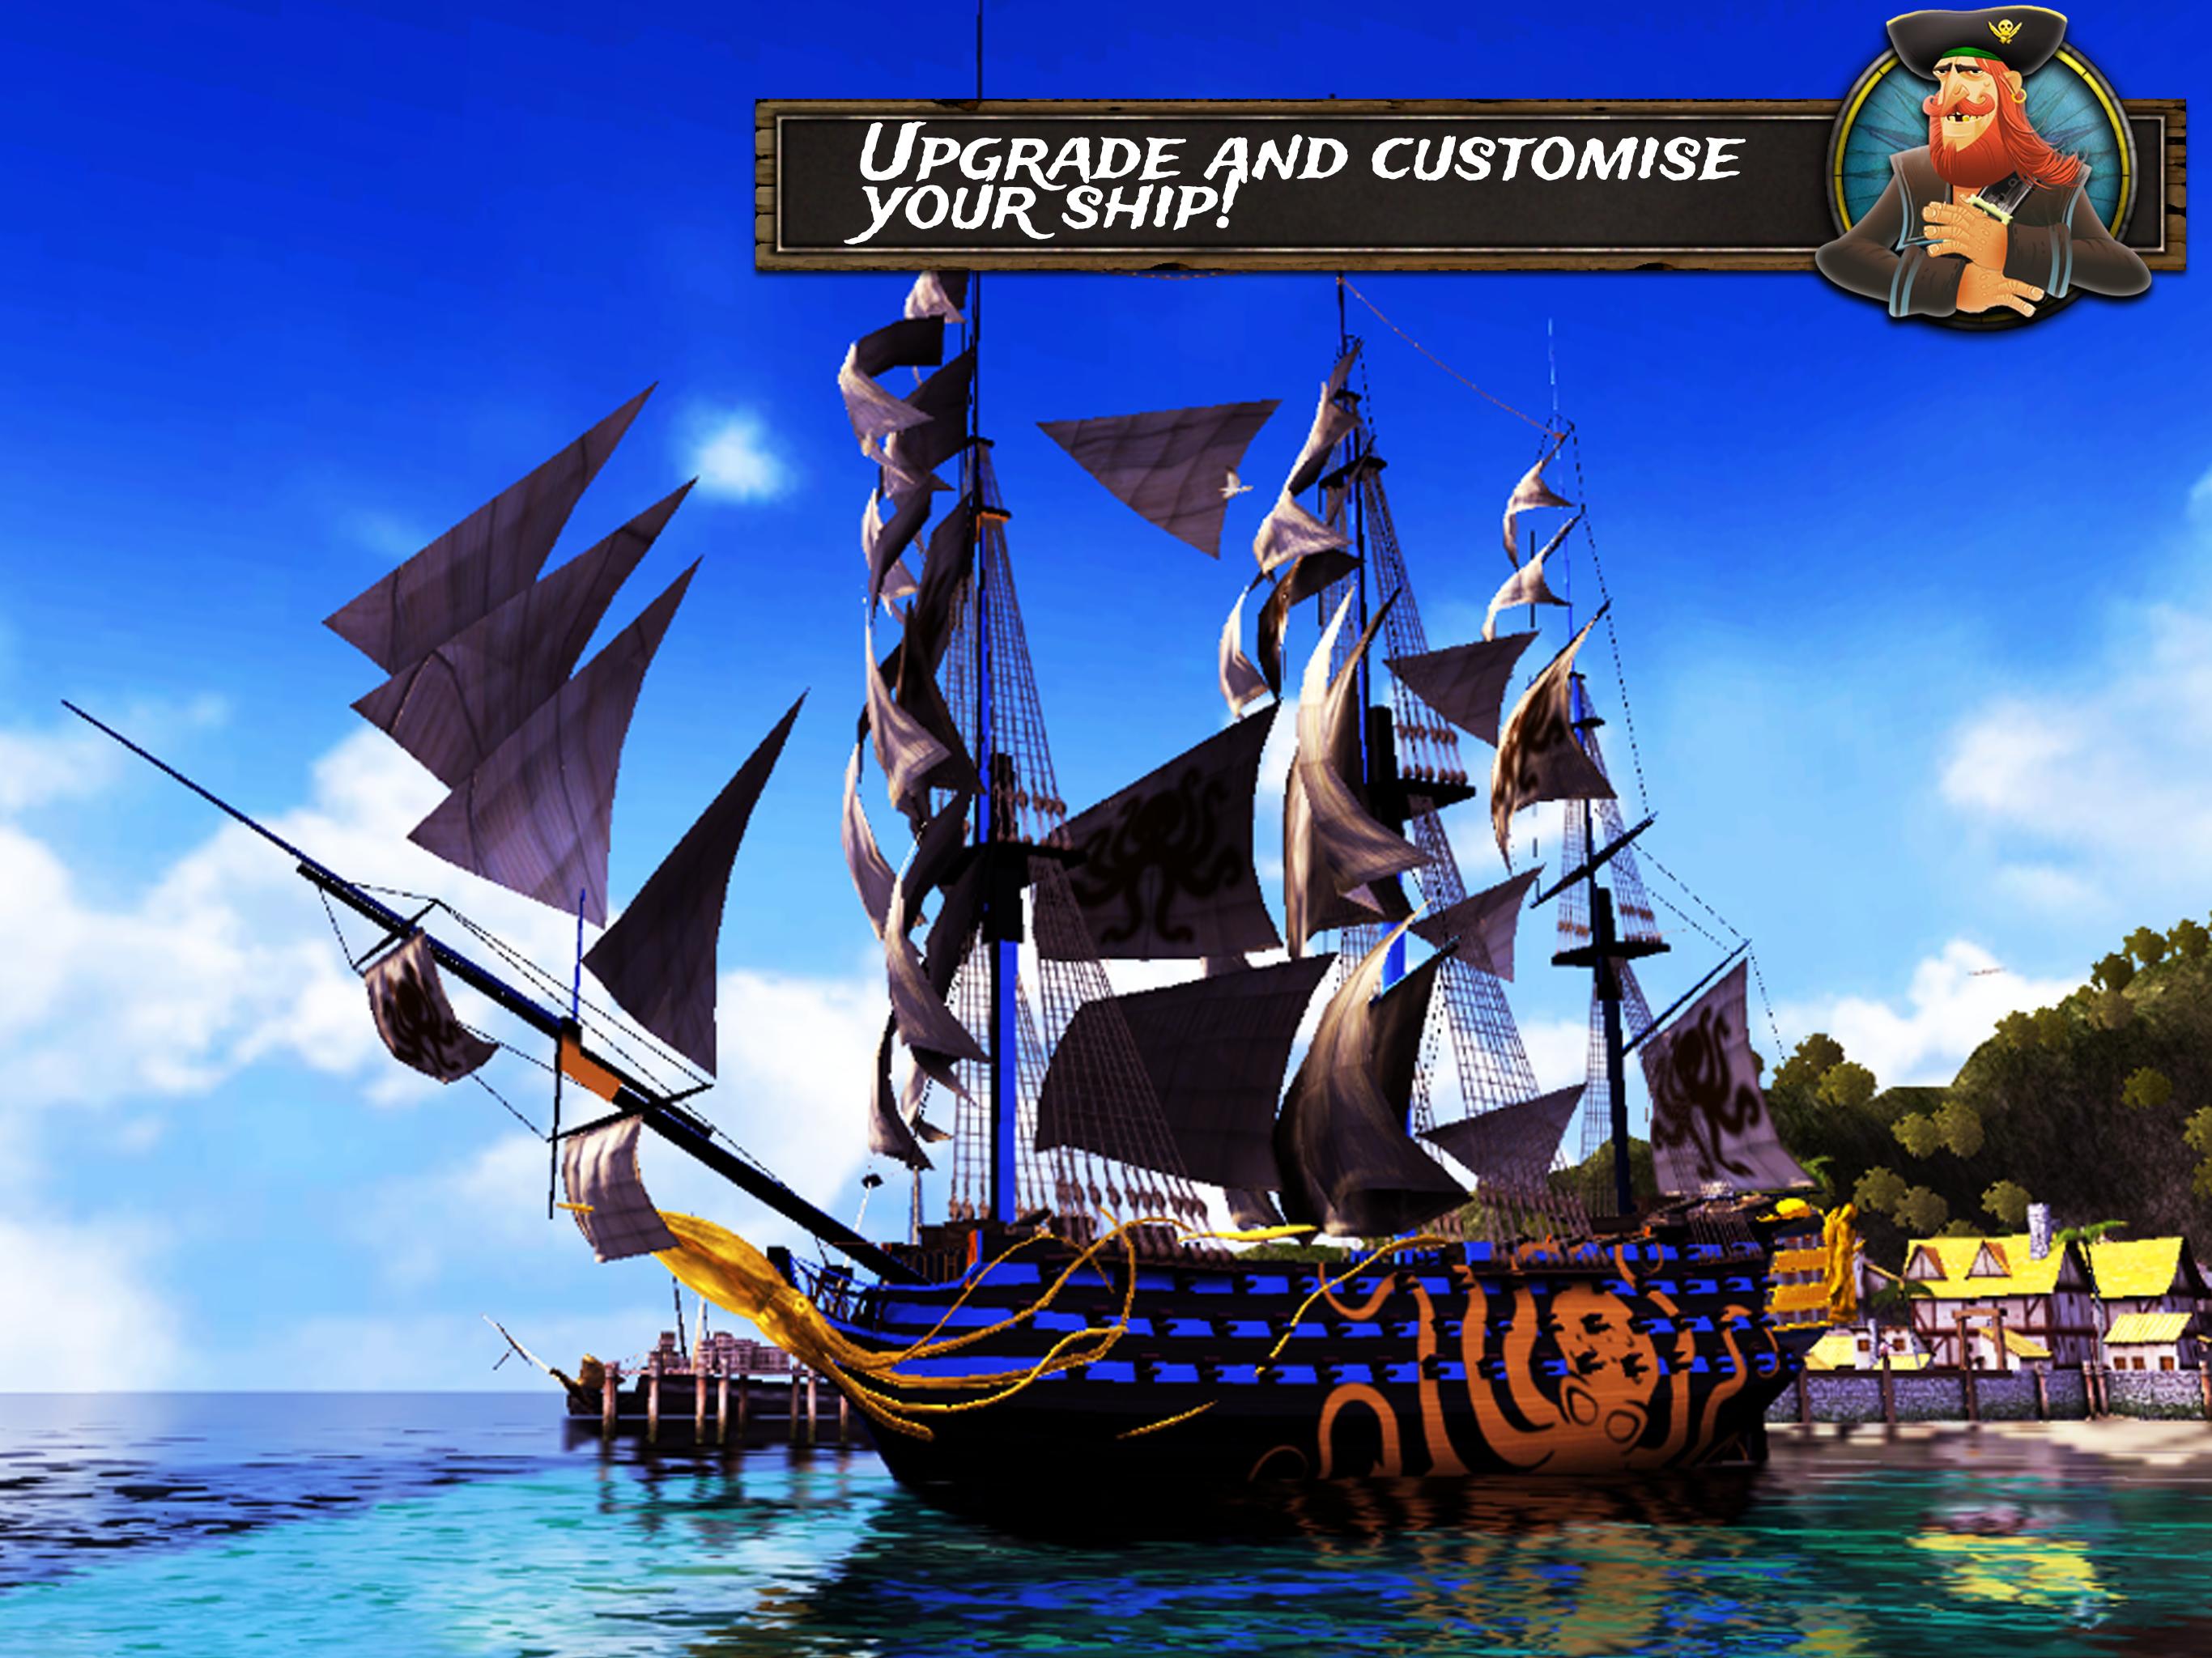 Pirate Quest: Become a Legend for Android - APK Download